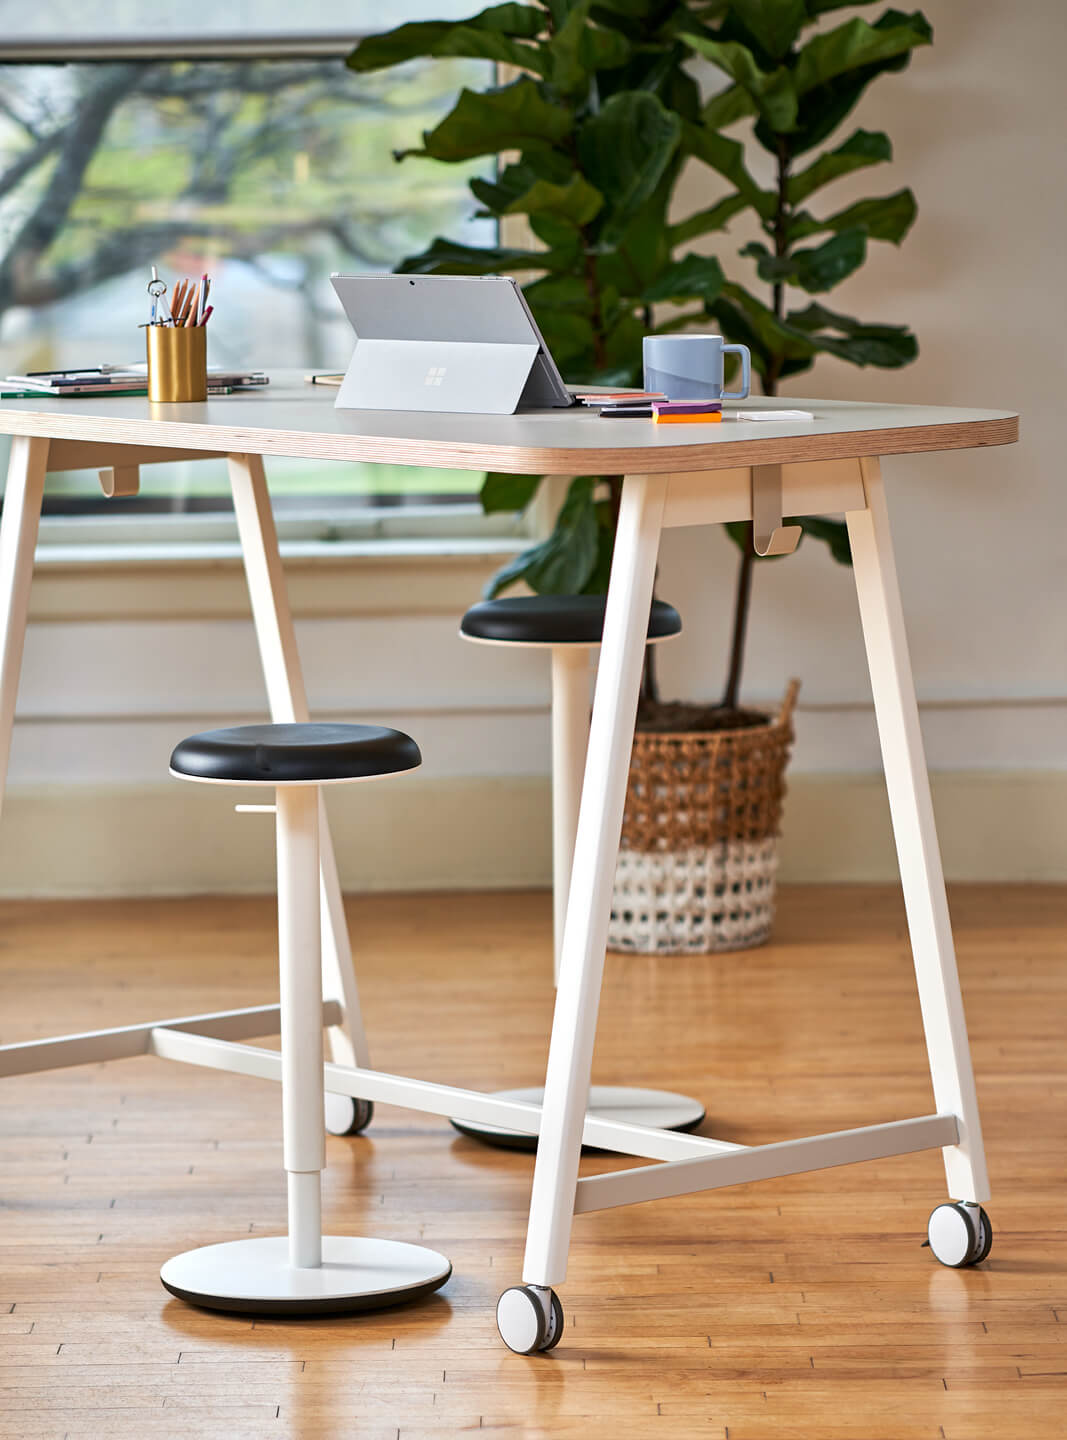 Haworth Design Studio Designer tall moveable table with stools